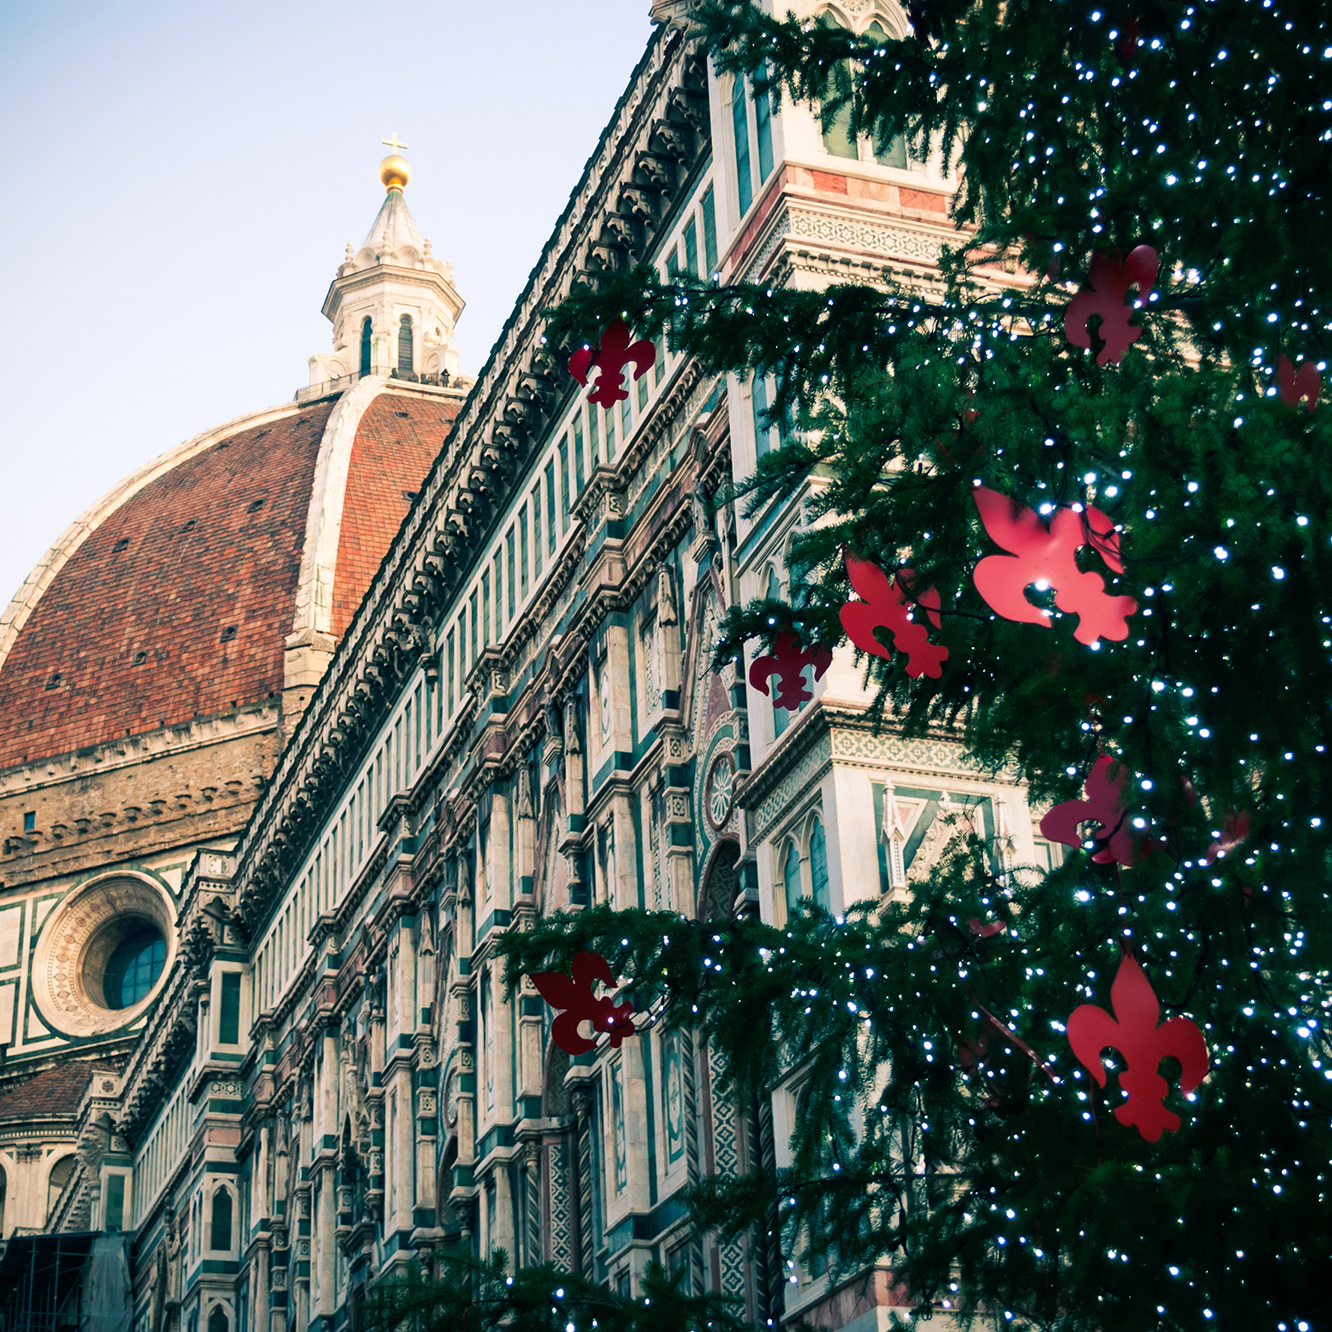 Christmas in Florence!